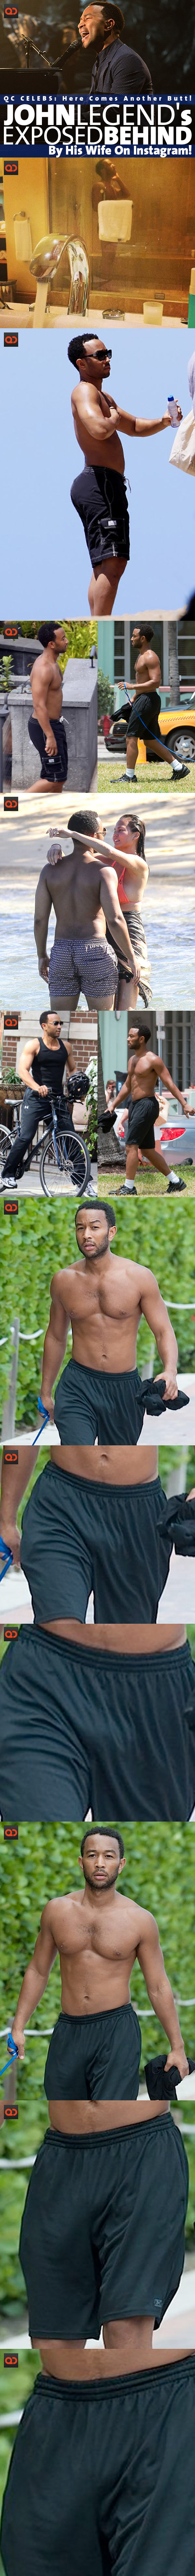 QC Celebs: Here Comes Another Butt! John Legend's Exposed Behind By His Wife On Instagram!